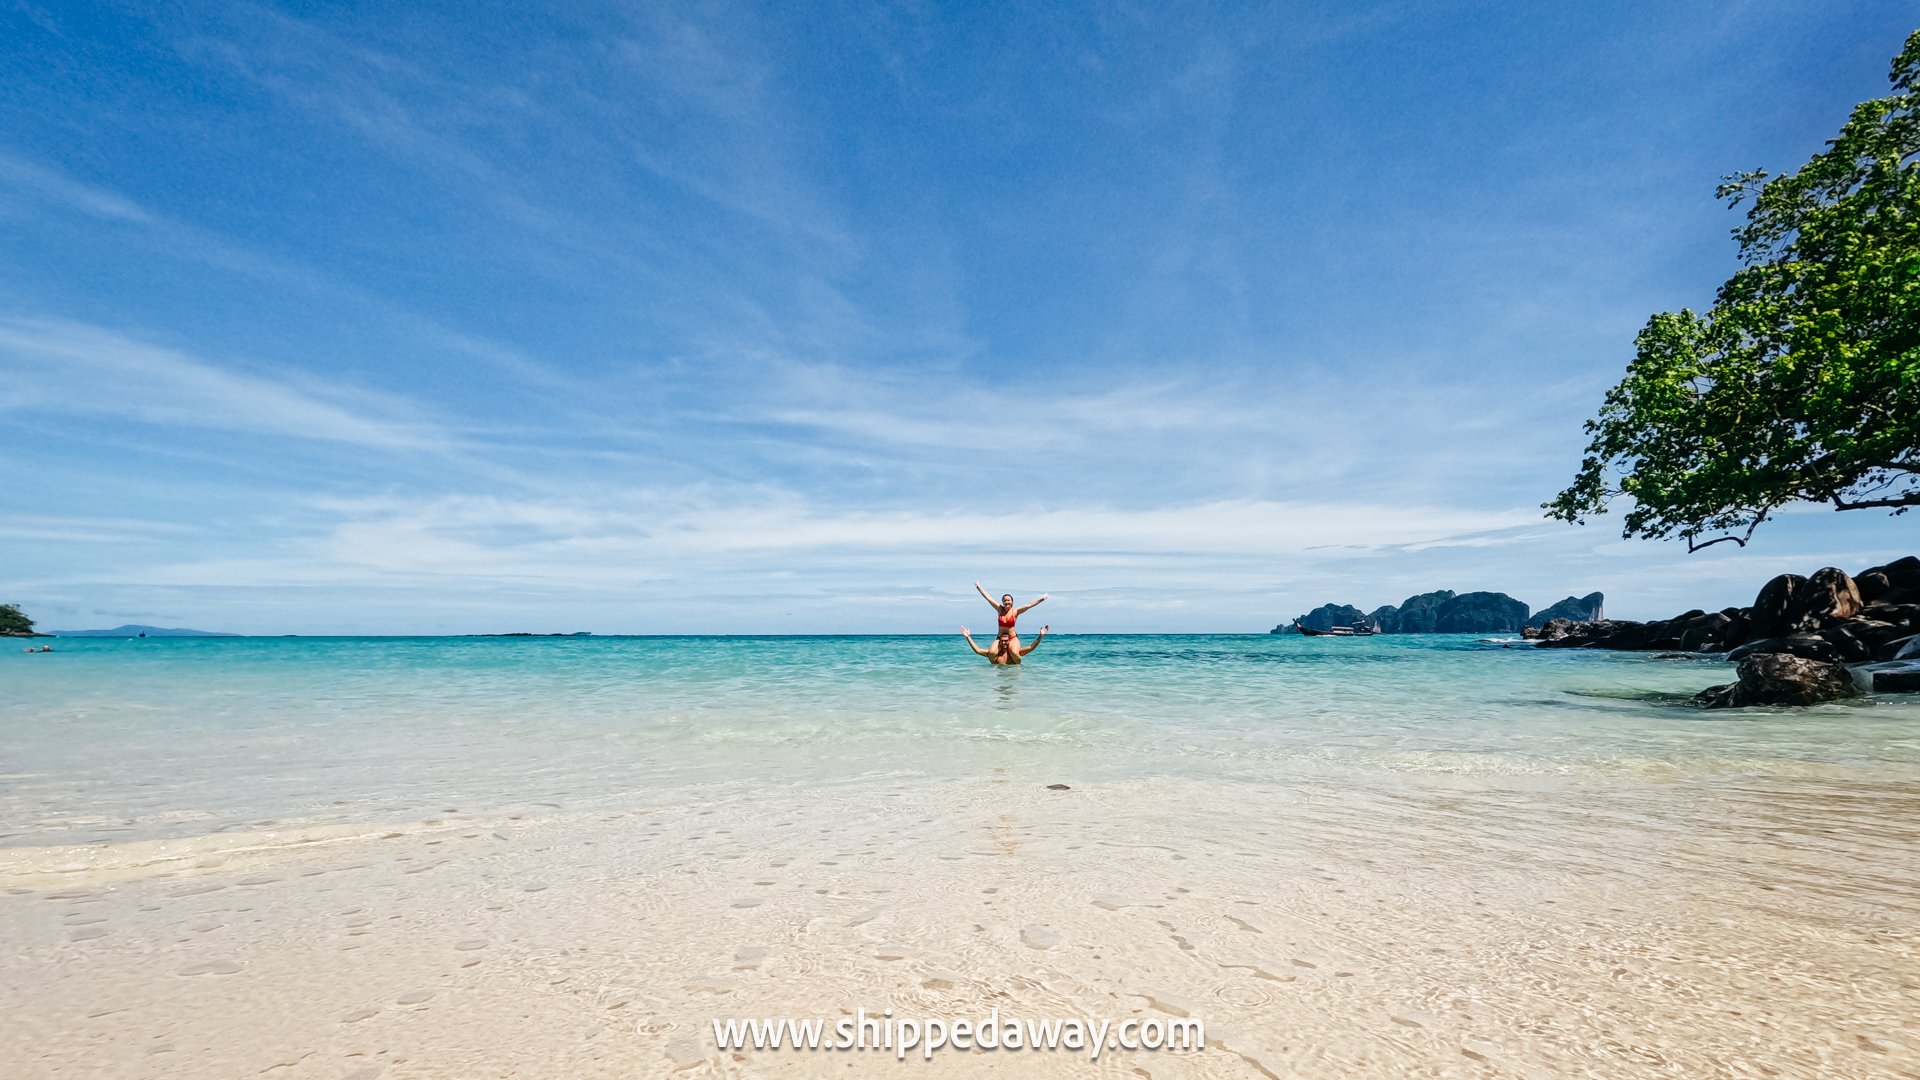 Enjoying a sunny day at the beach of Phi Phi Islands - must-do